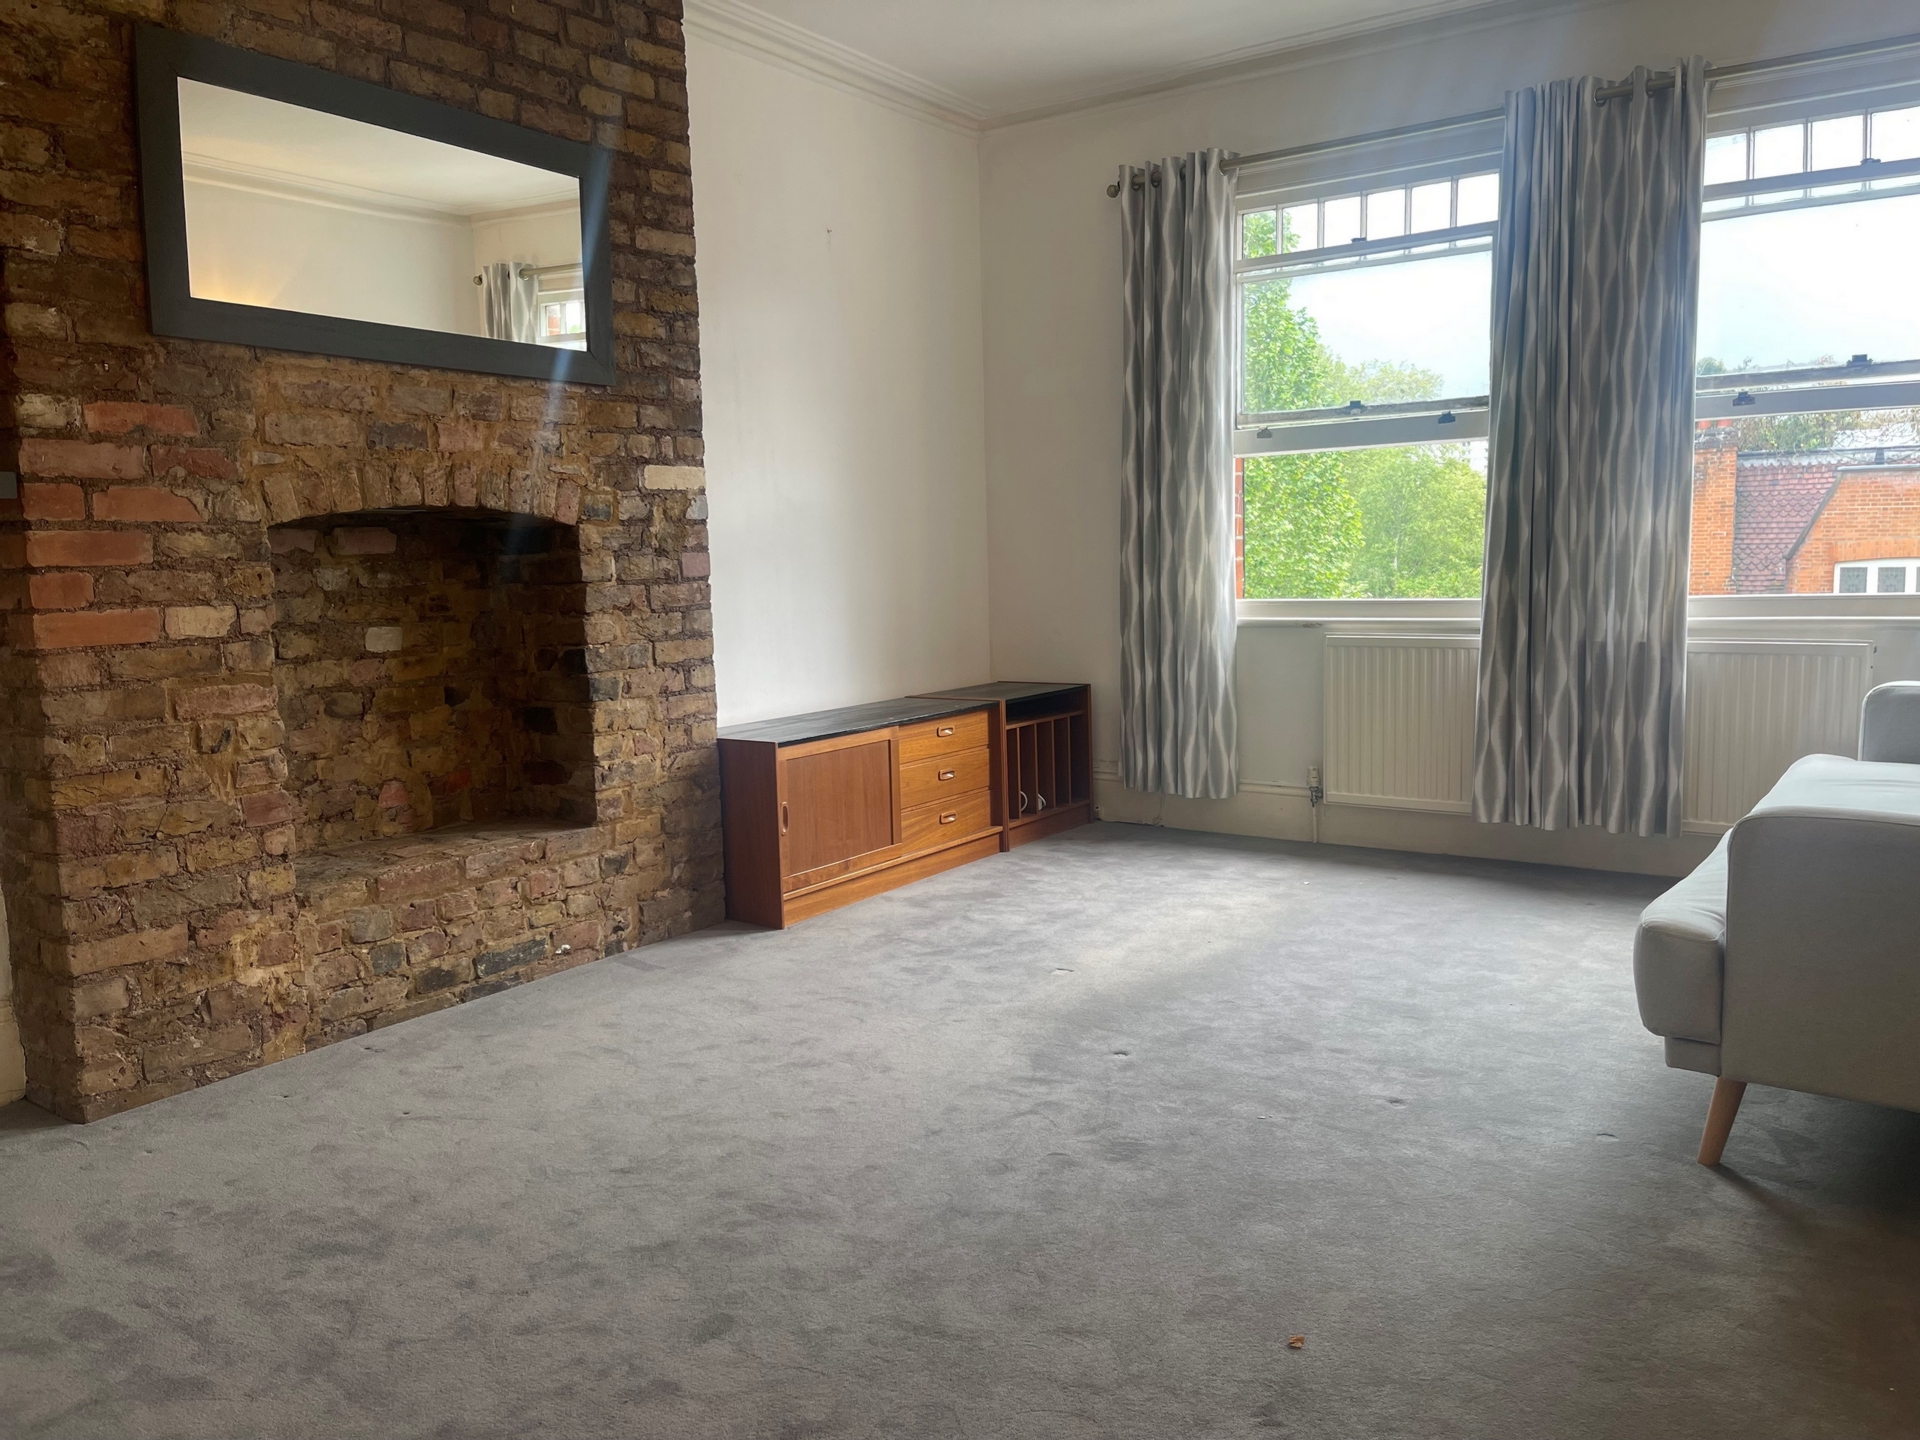 1 Bedroom Flat to rent in South Hampstead, London, NW6